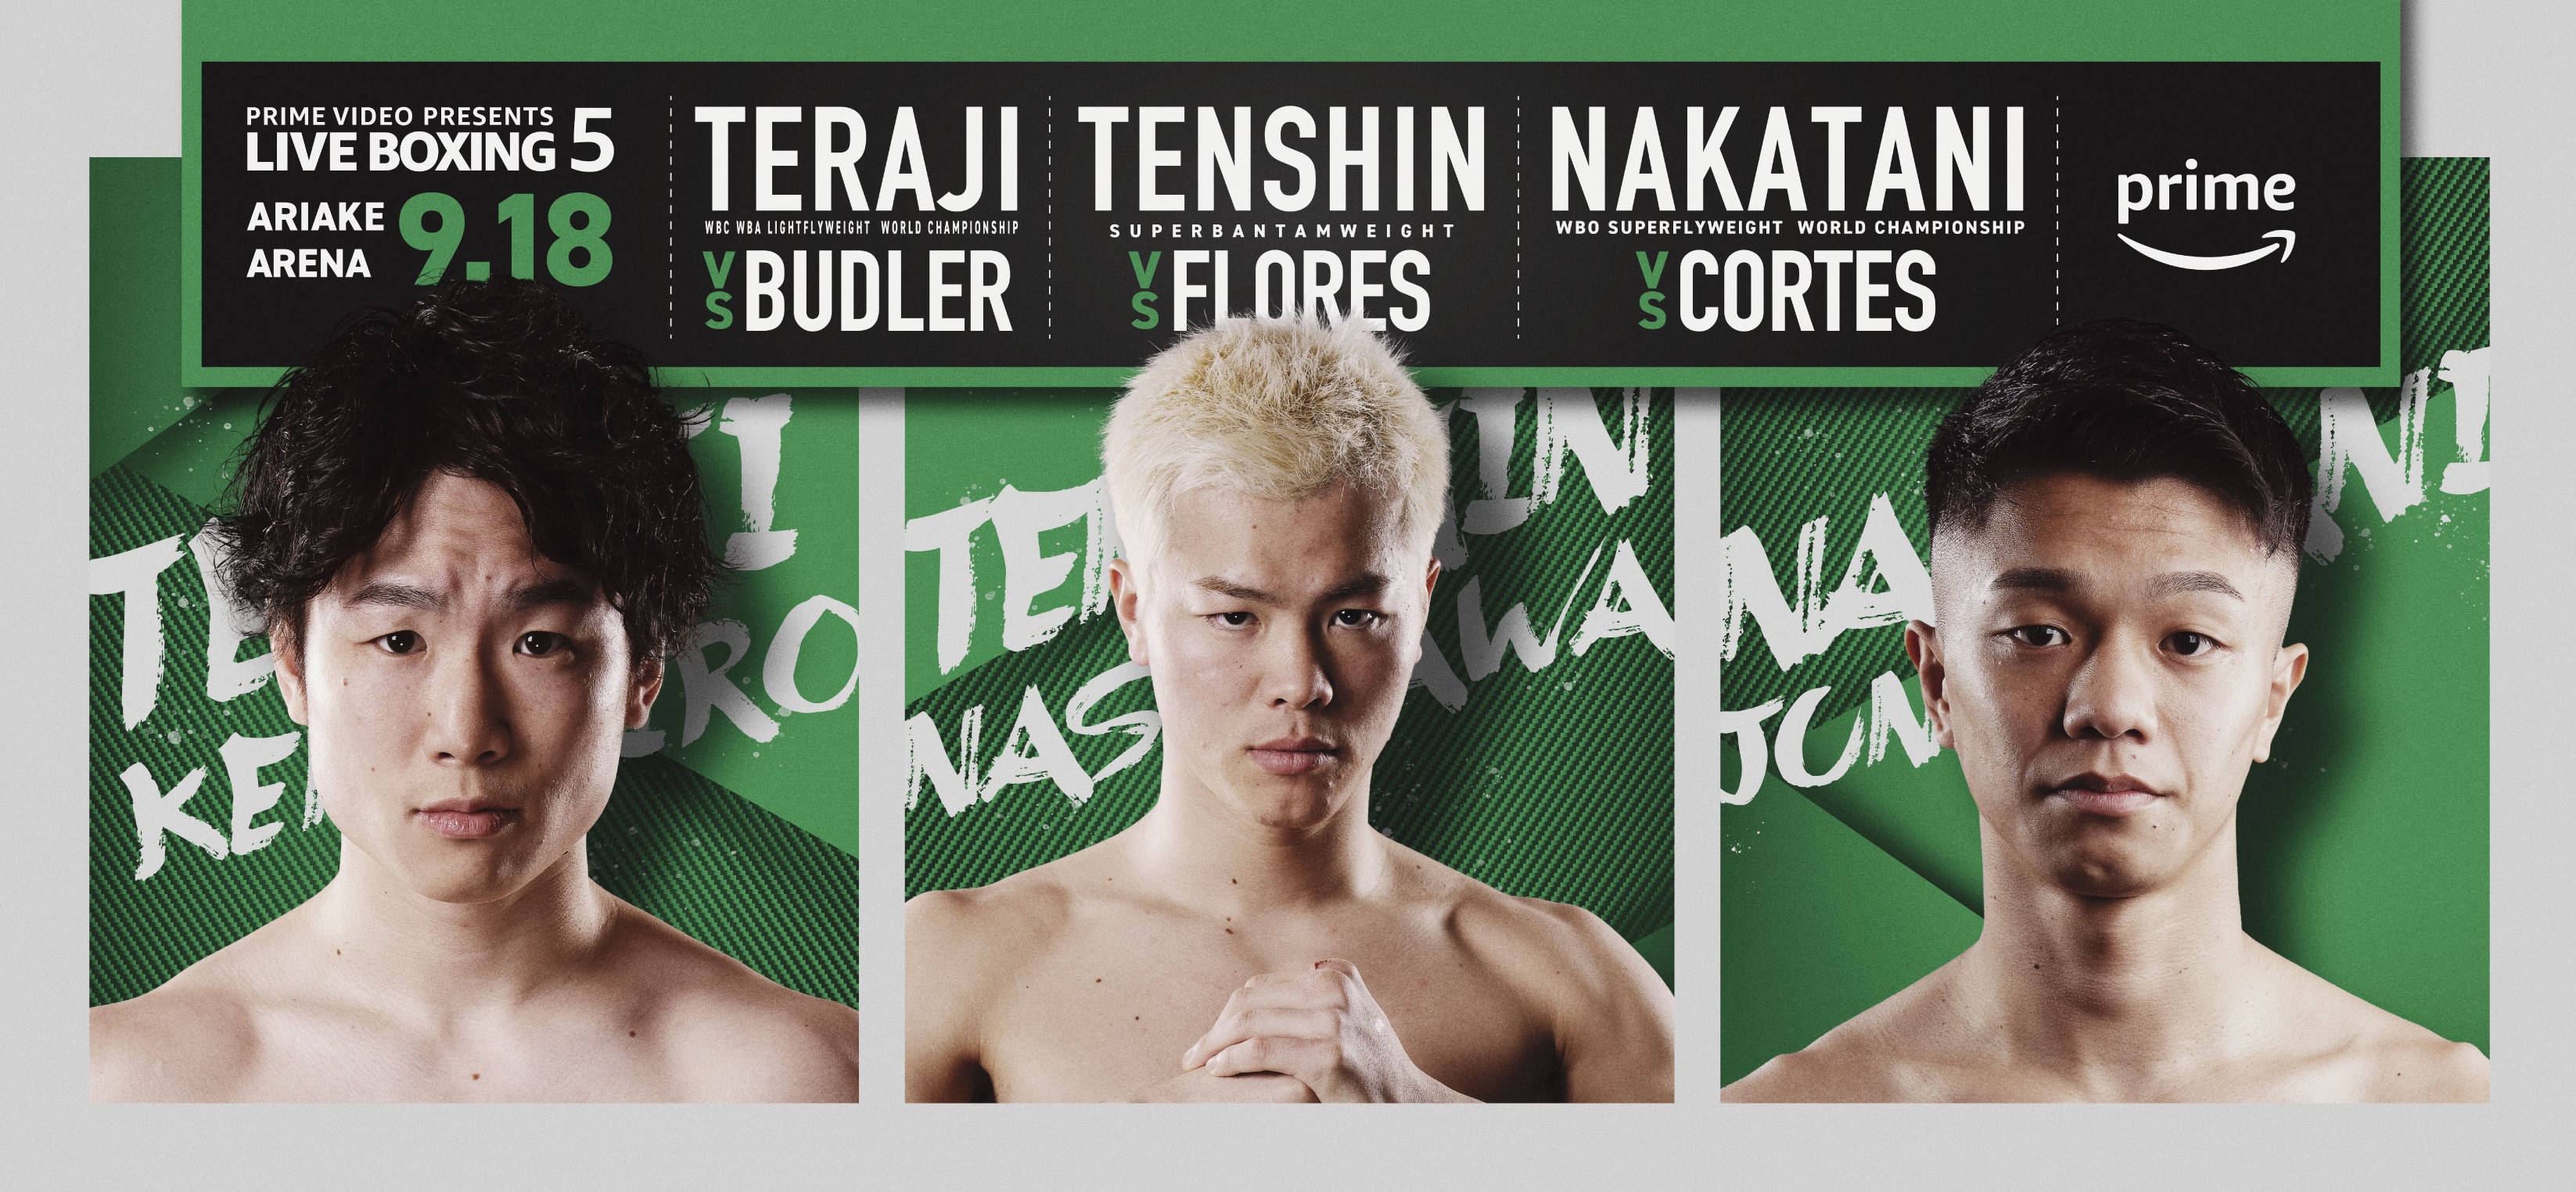 Prime Video Presents Live Boxing 5』那須川天心のボクシング2戦目は、9戦全勝7KOのメキシコの新鋭と対戦！｜アマゾンジャパン合同会社のプレスリリース